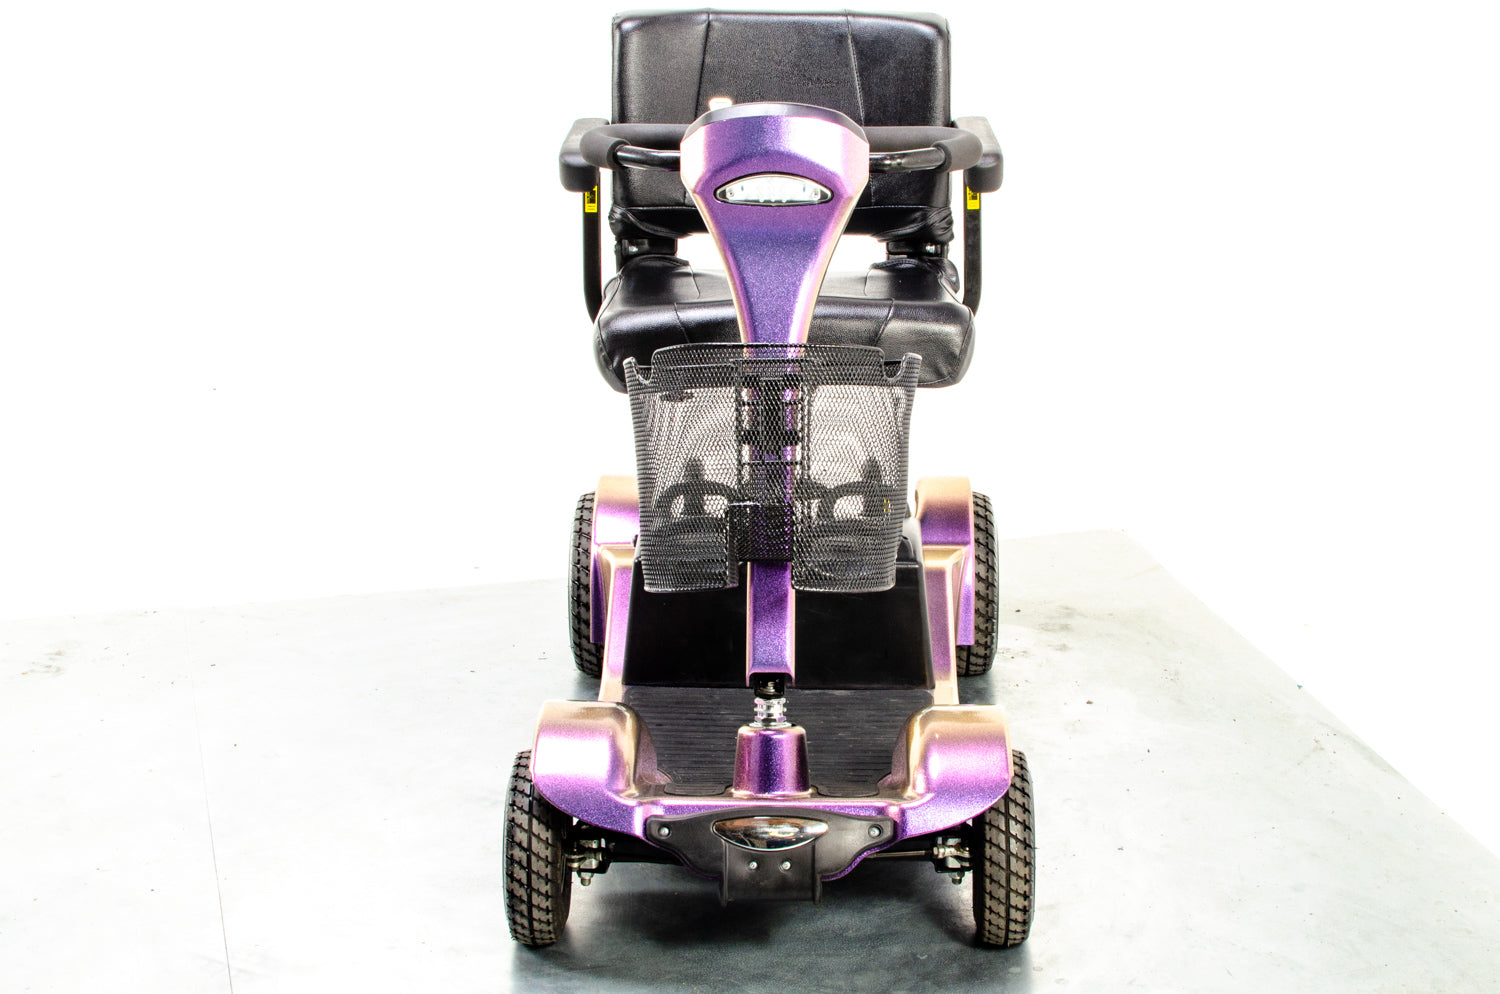 Sterling Sapphire 2 Used Mobility Scooter Transportable Pneumatic Folding Boot Purple Pearl